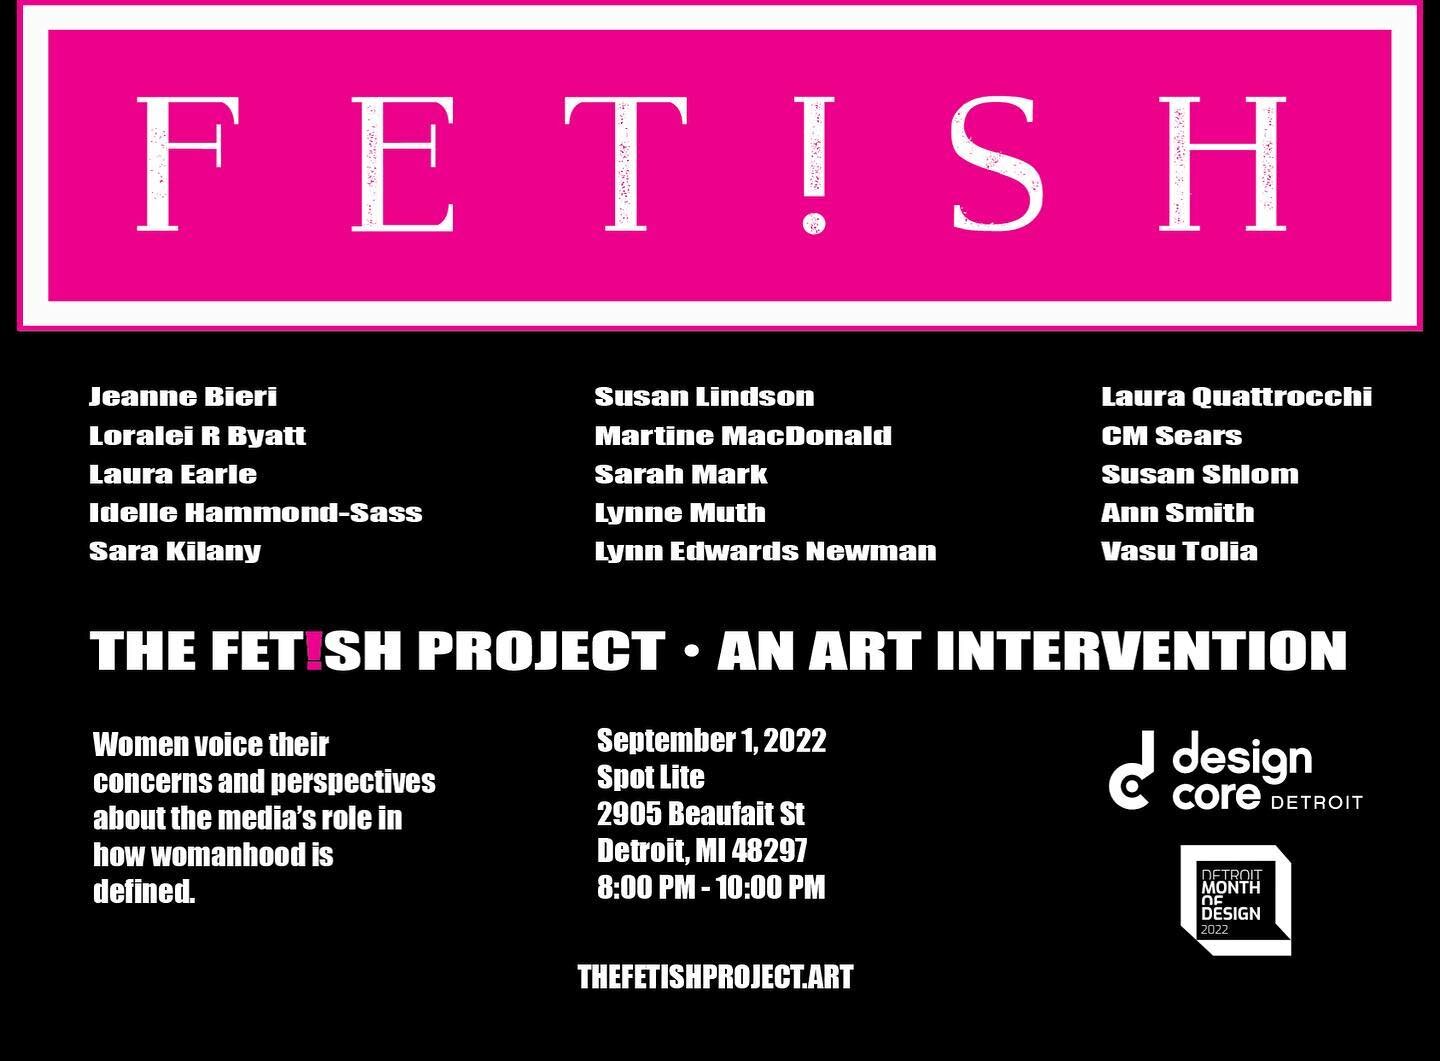 TONIGHT! Meet The FET!SH Project at Spot Lite from 7 PM - 10 PM. 

The FET!SH Project is an artistic intervention that gives women a place to voice their concerns and perspectives about the media&rsquo;s role in how womanhood is defined. 

There will